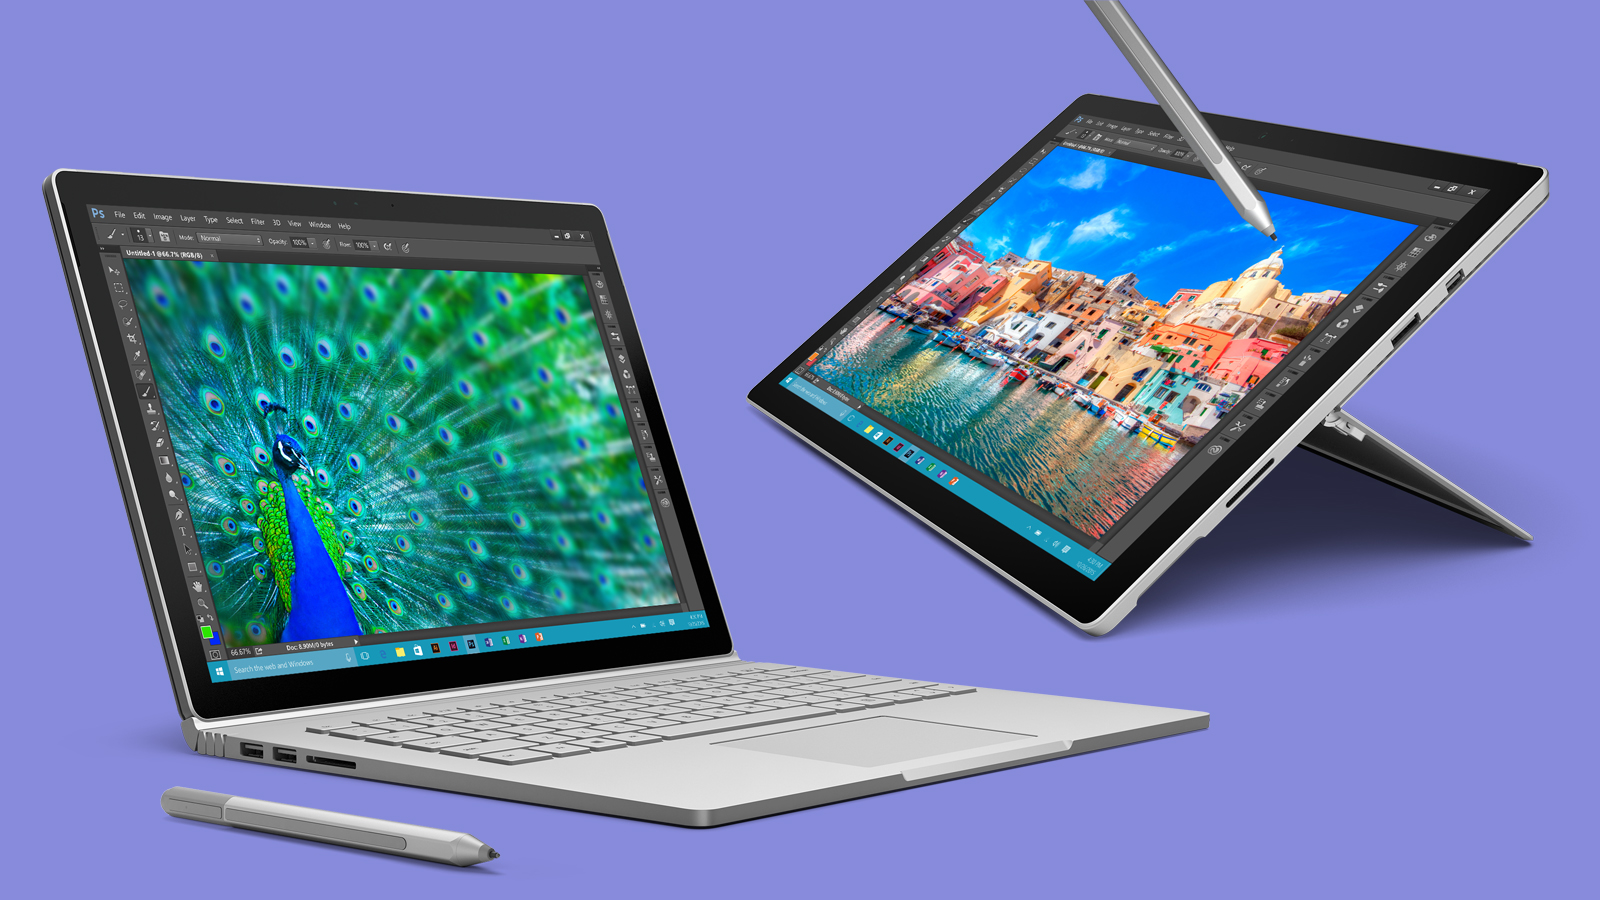 Microsoft Has Sold Nearly 10 Times More Surface Pro 4s Than Surface Books Techradar